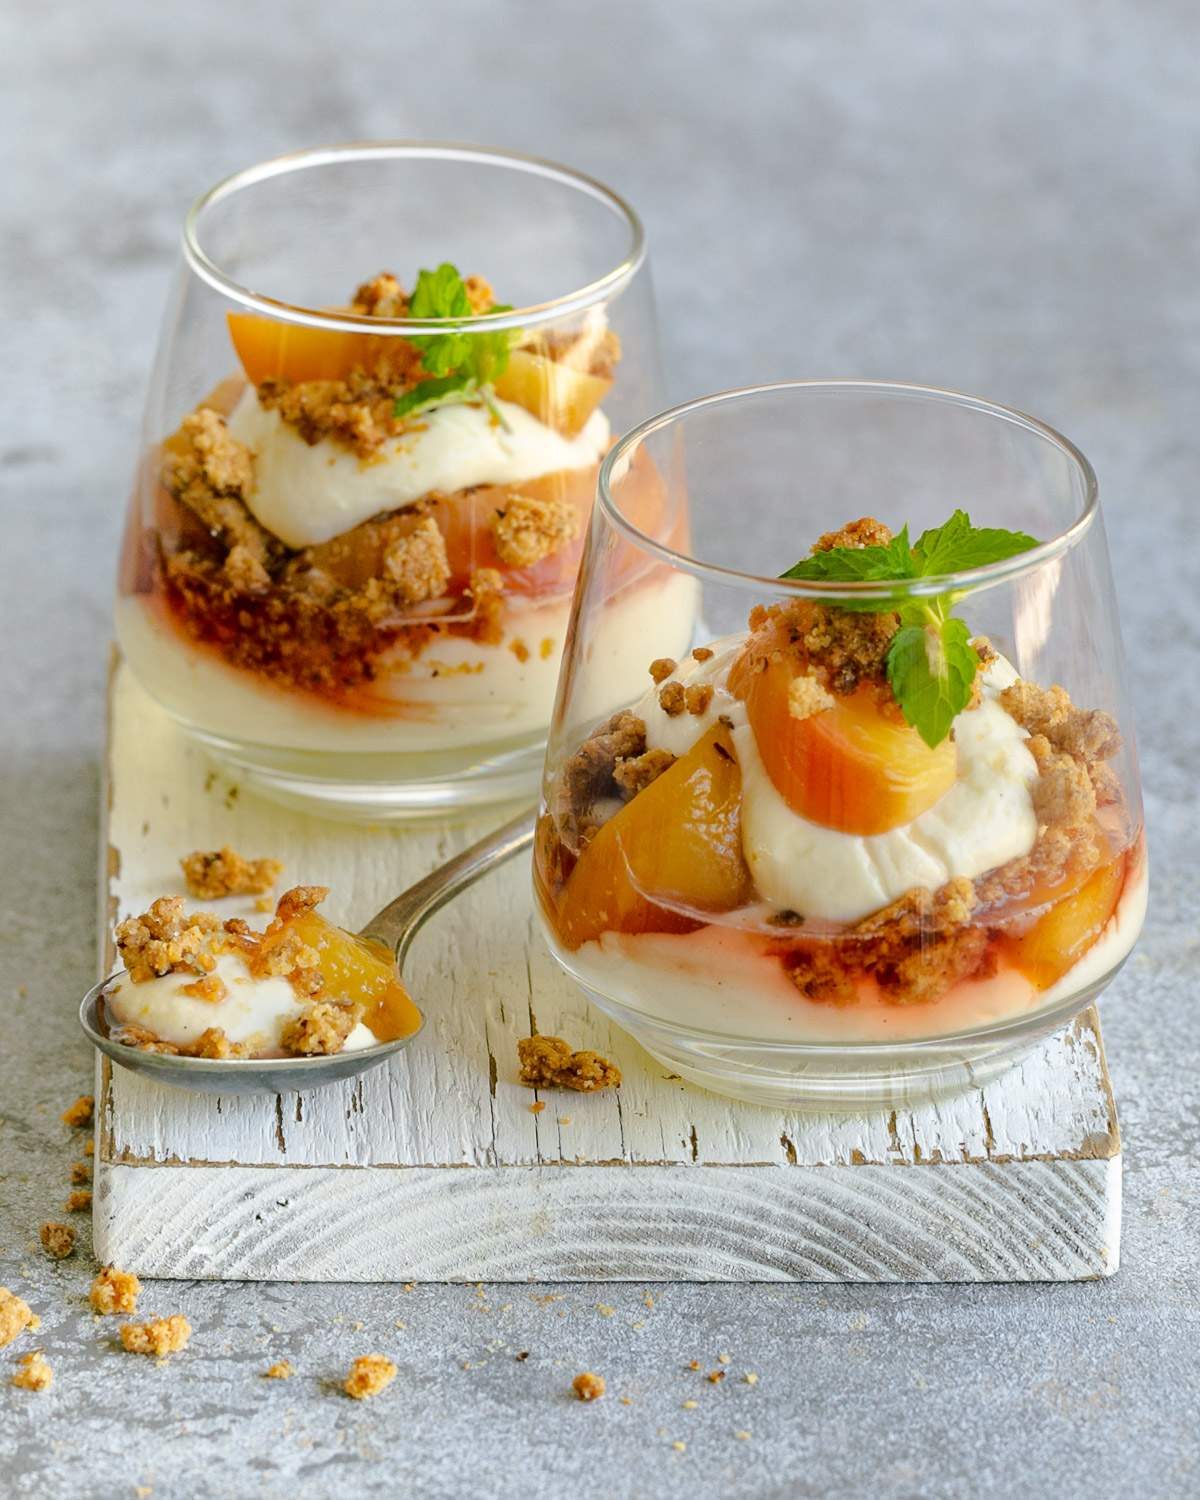 Lemon cheesecake Mousse with Poached Peaches